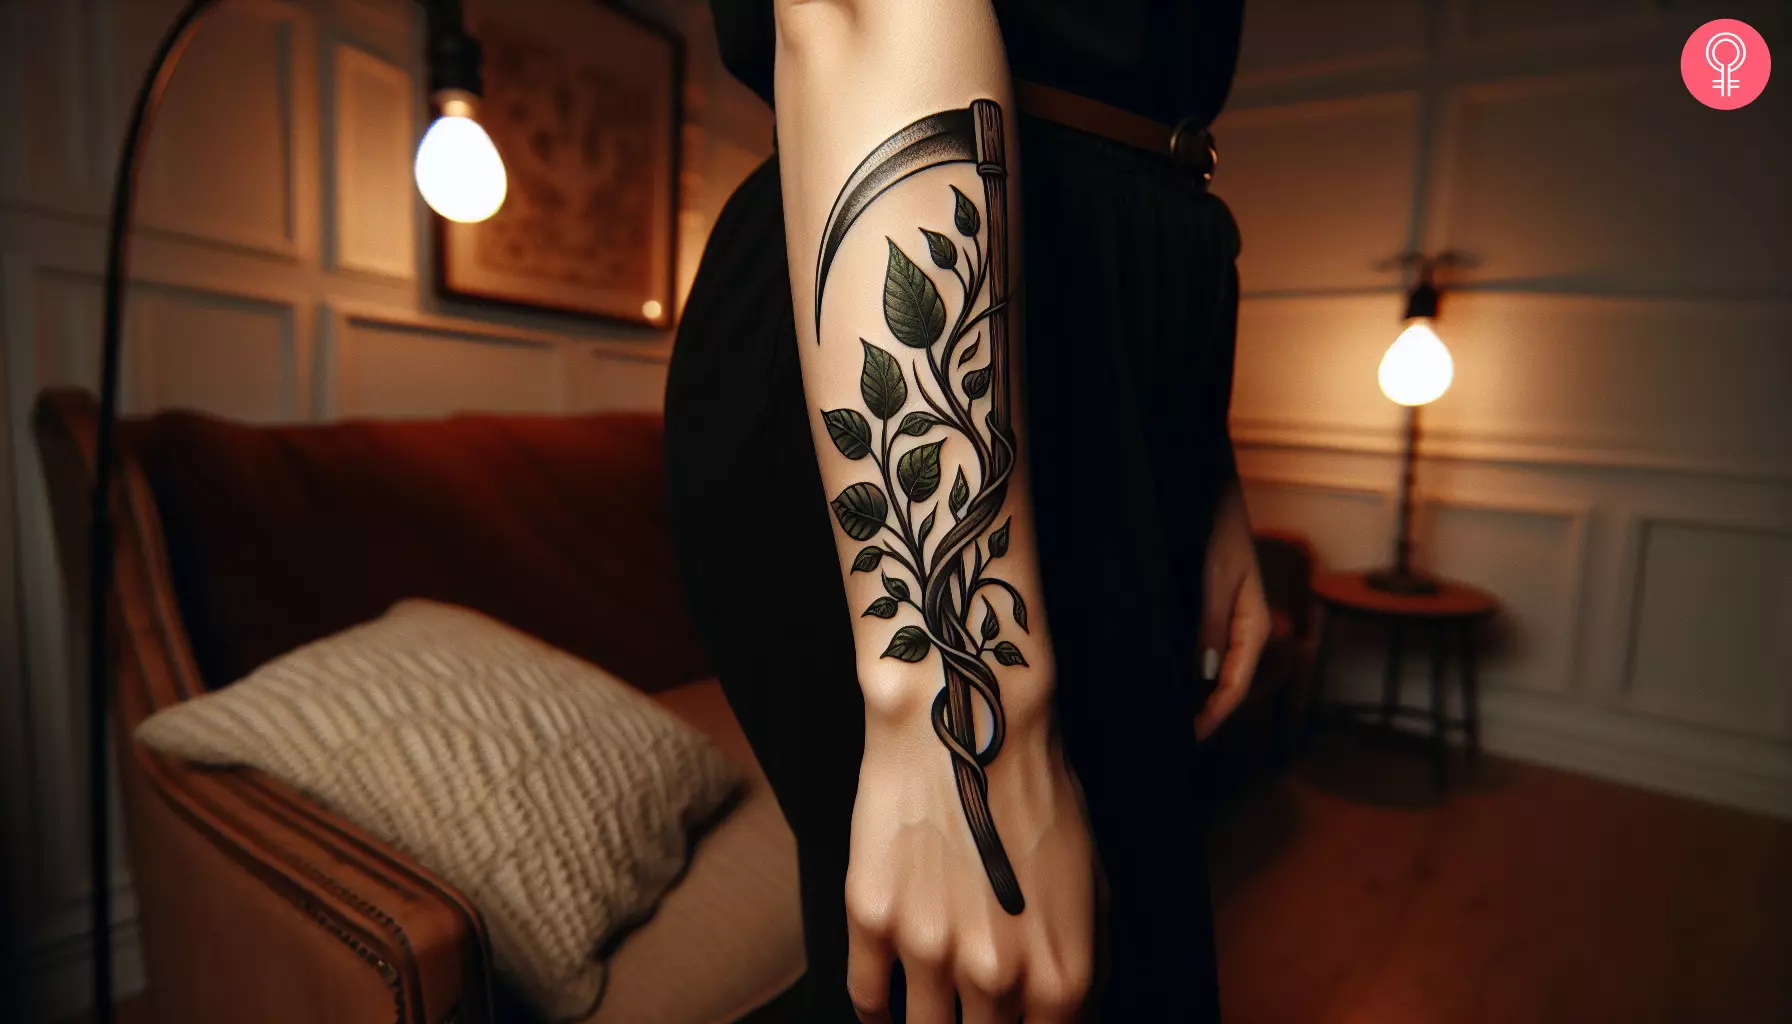 A scythe tattoo intertwined with vines on the back of the hand